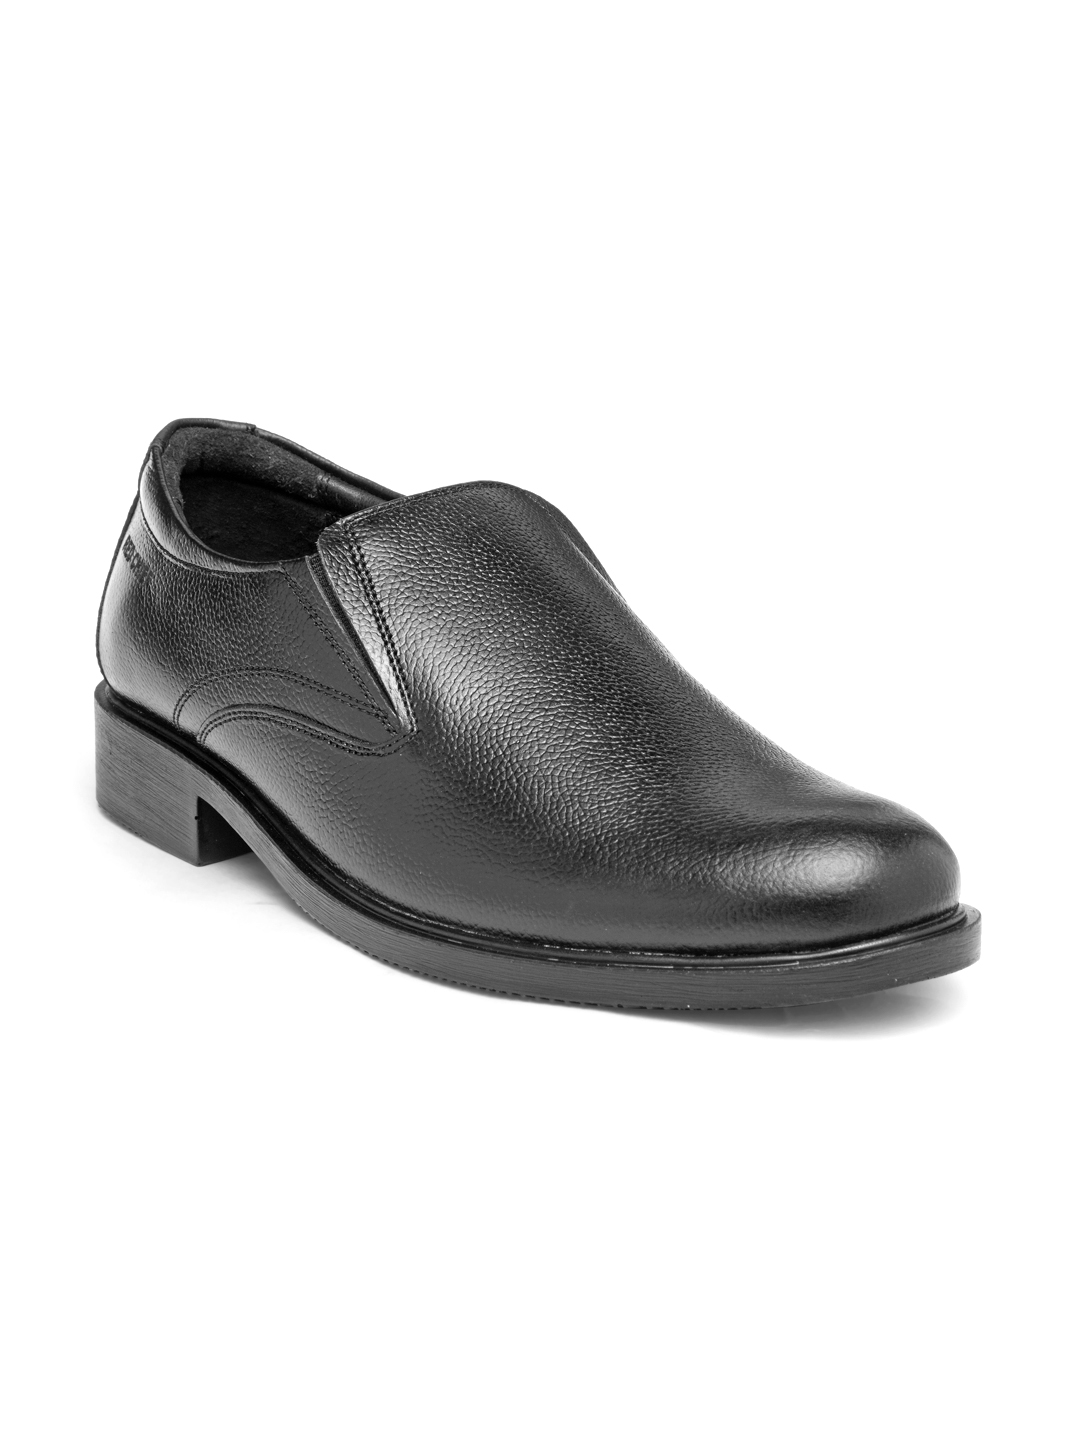 Buy Red Chief Men Black Leather Formal 